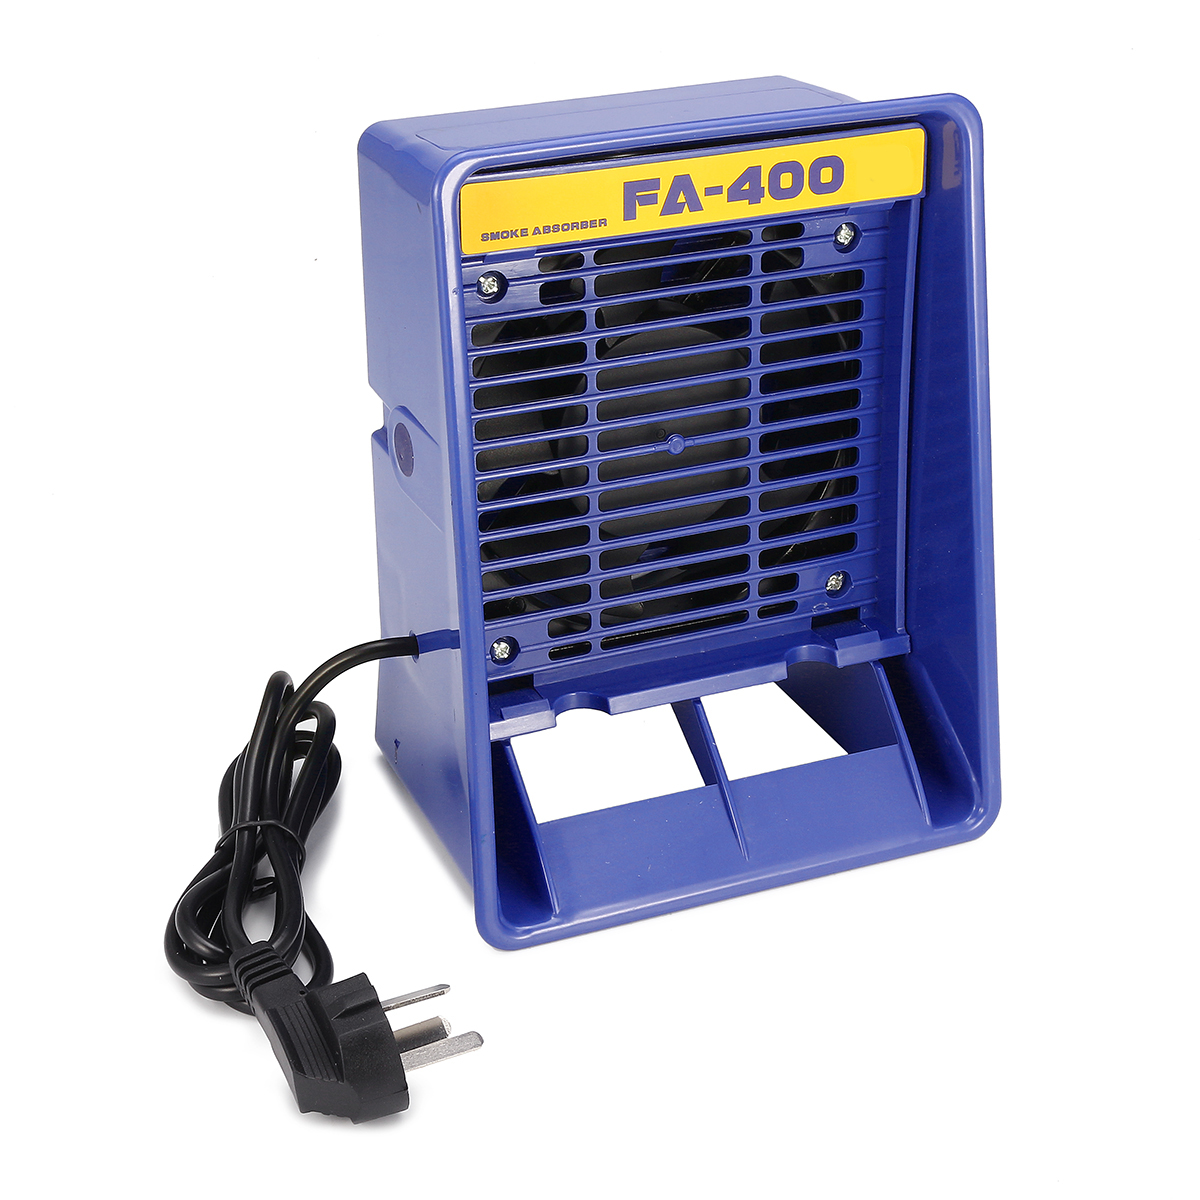 FA-400-110V-Soldering-Iron-Smoke-Absorber-Remover-Fume-Extractor-Smoke-Air-Fan--2-Filters-1335903-3